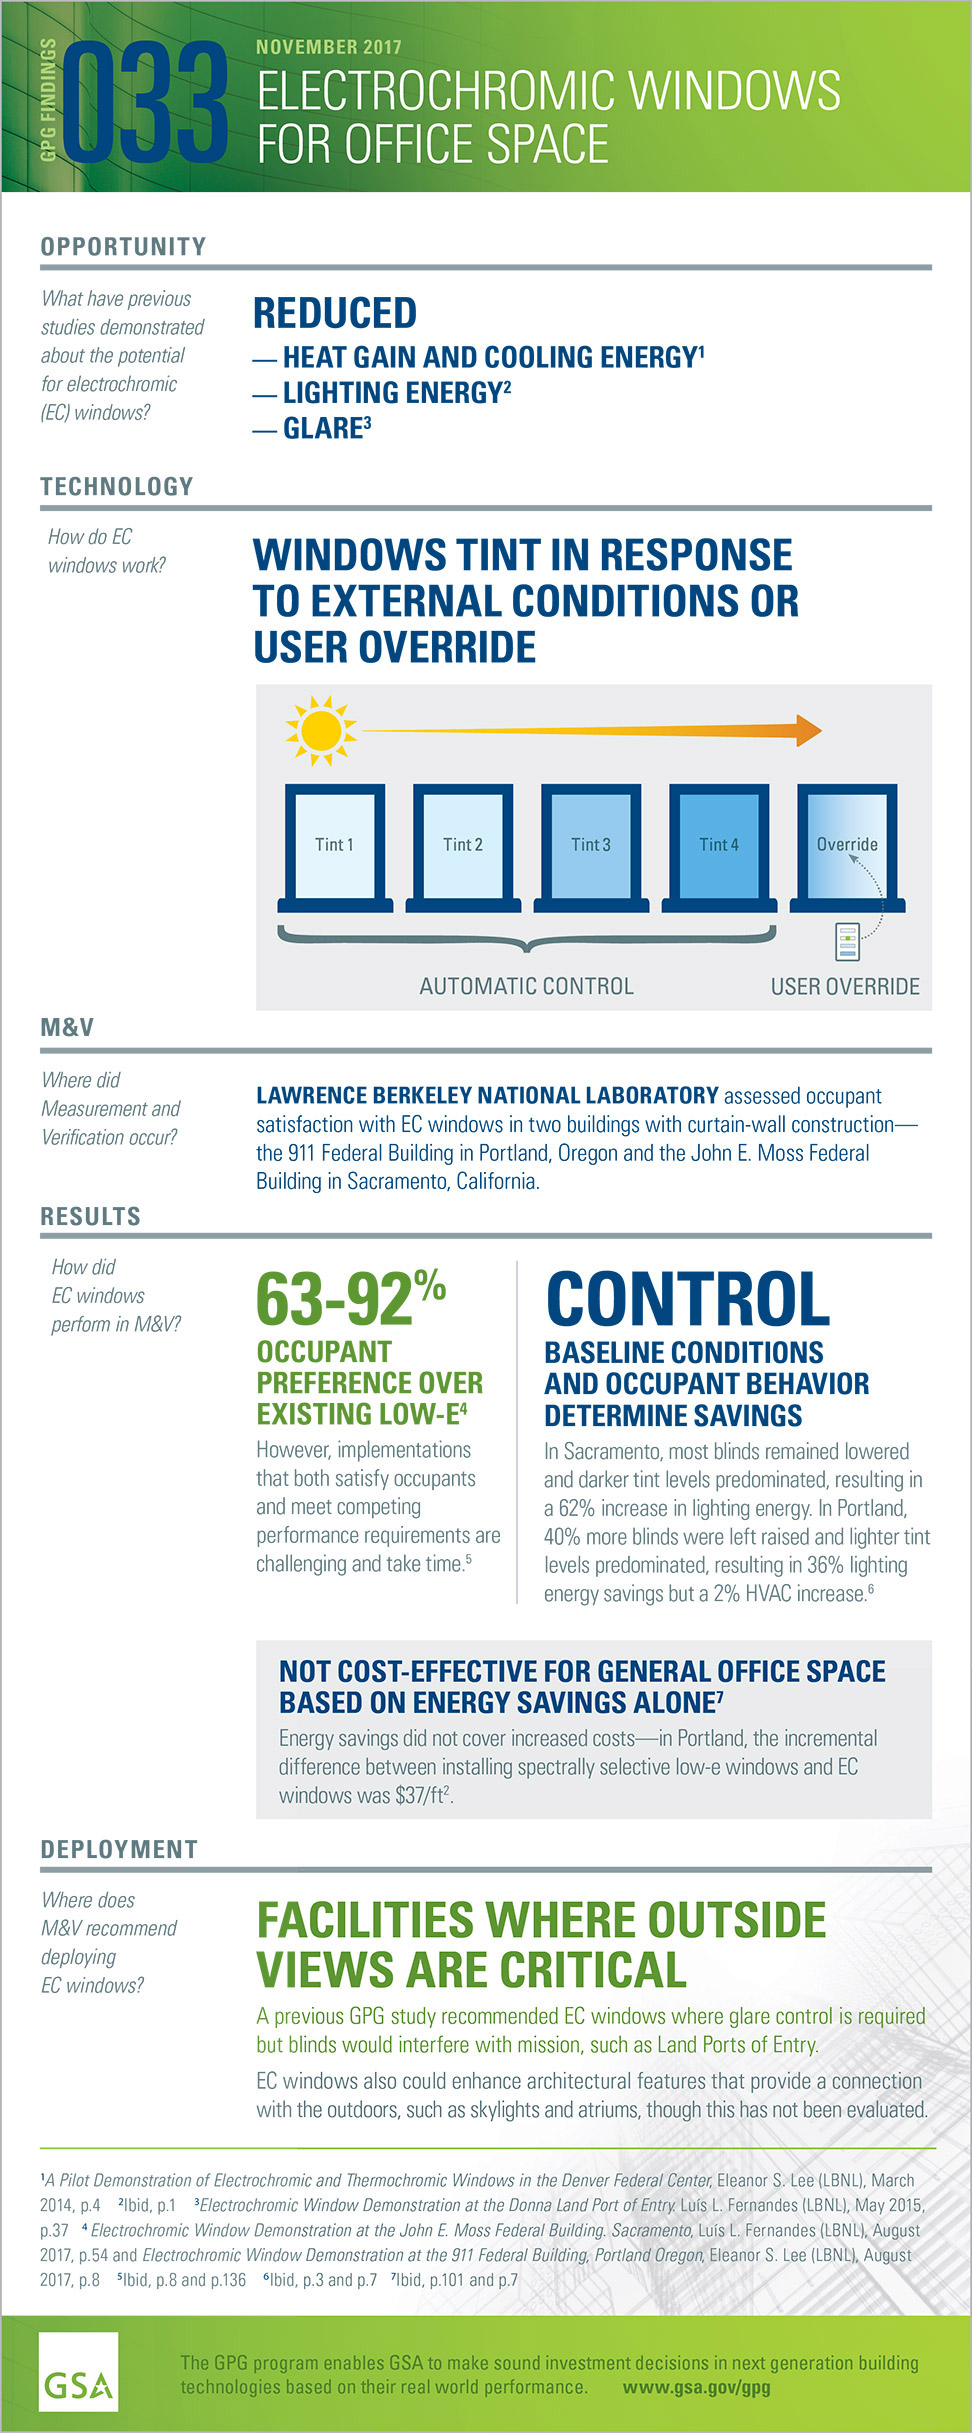 Download the PDF of the full-size infographic for GPG033 EC Windows for Office Space.